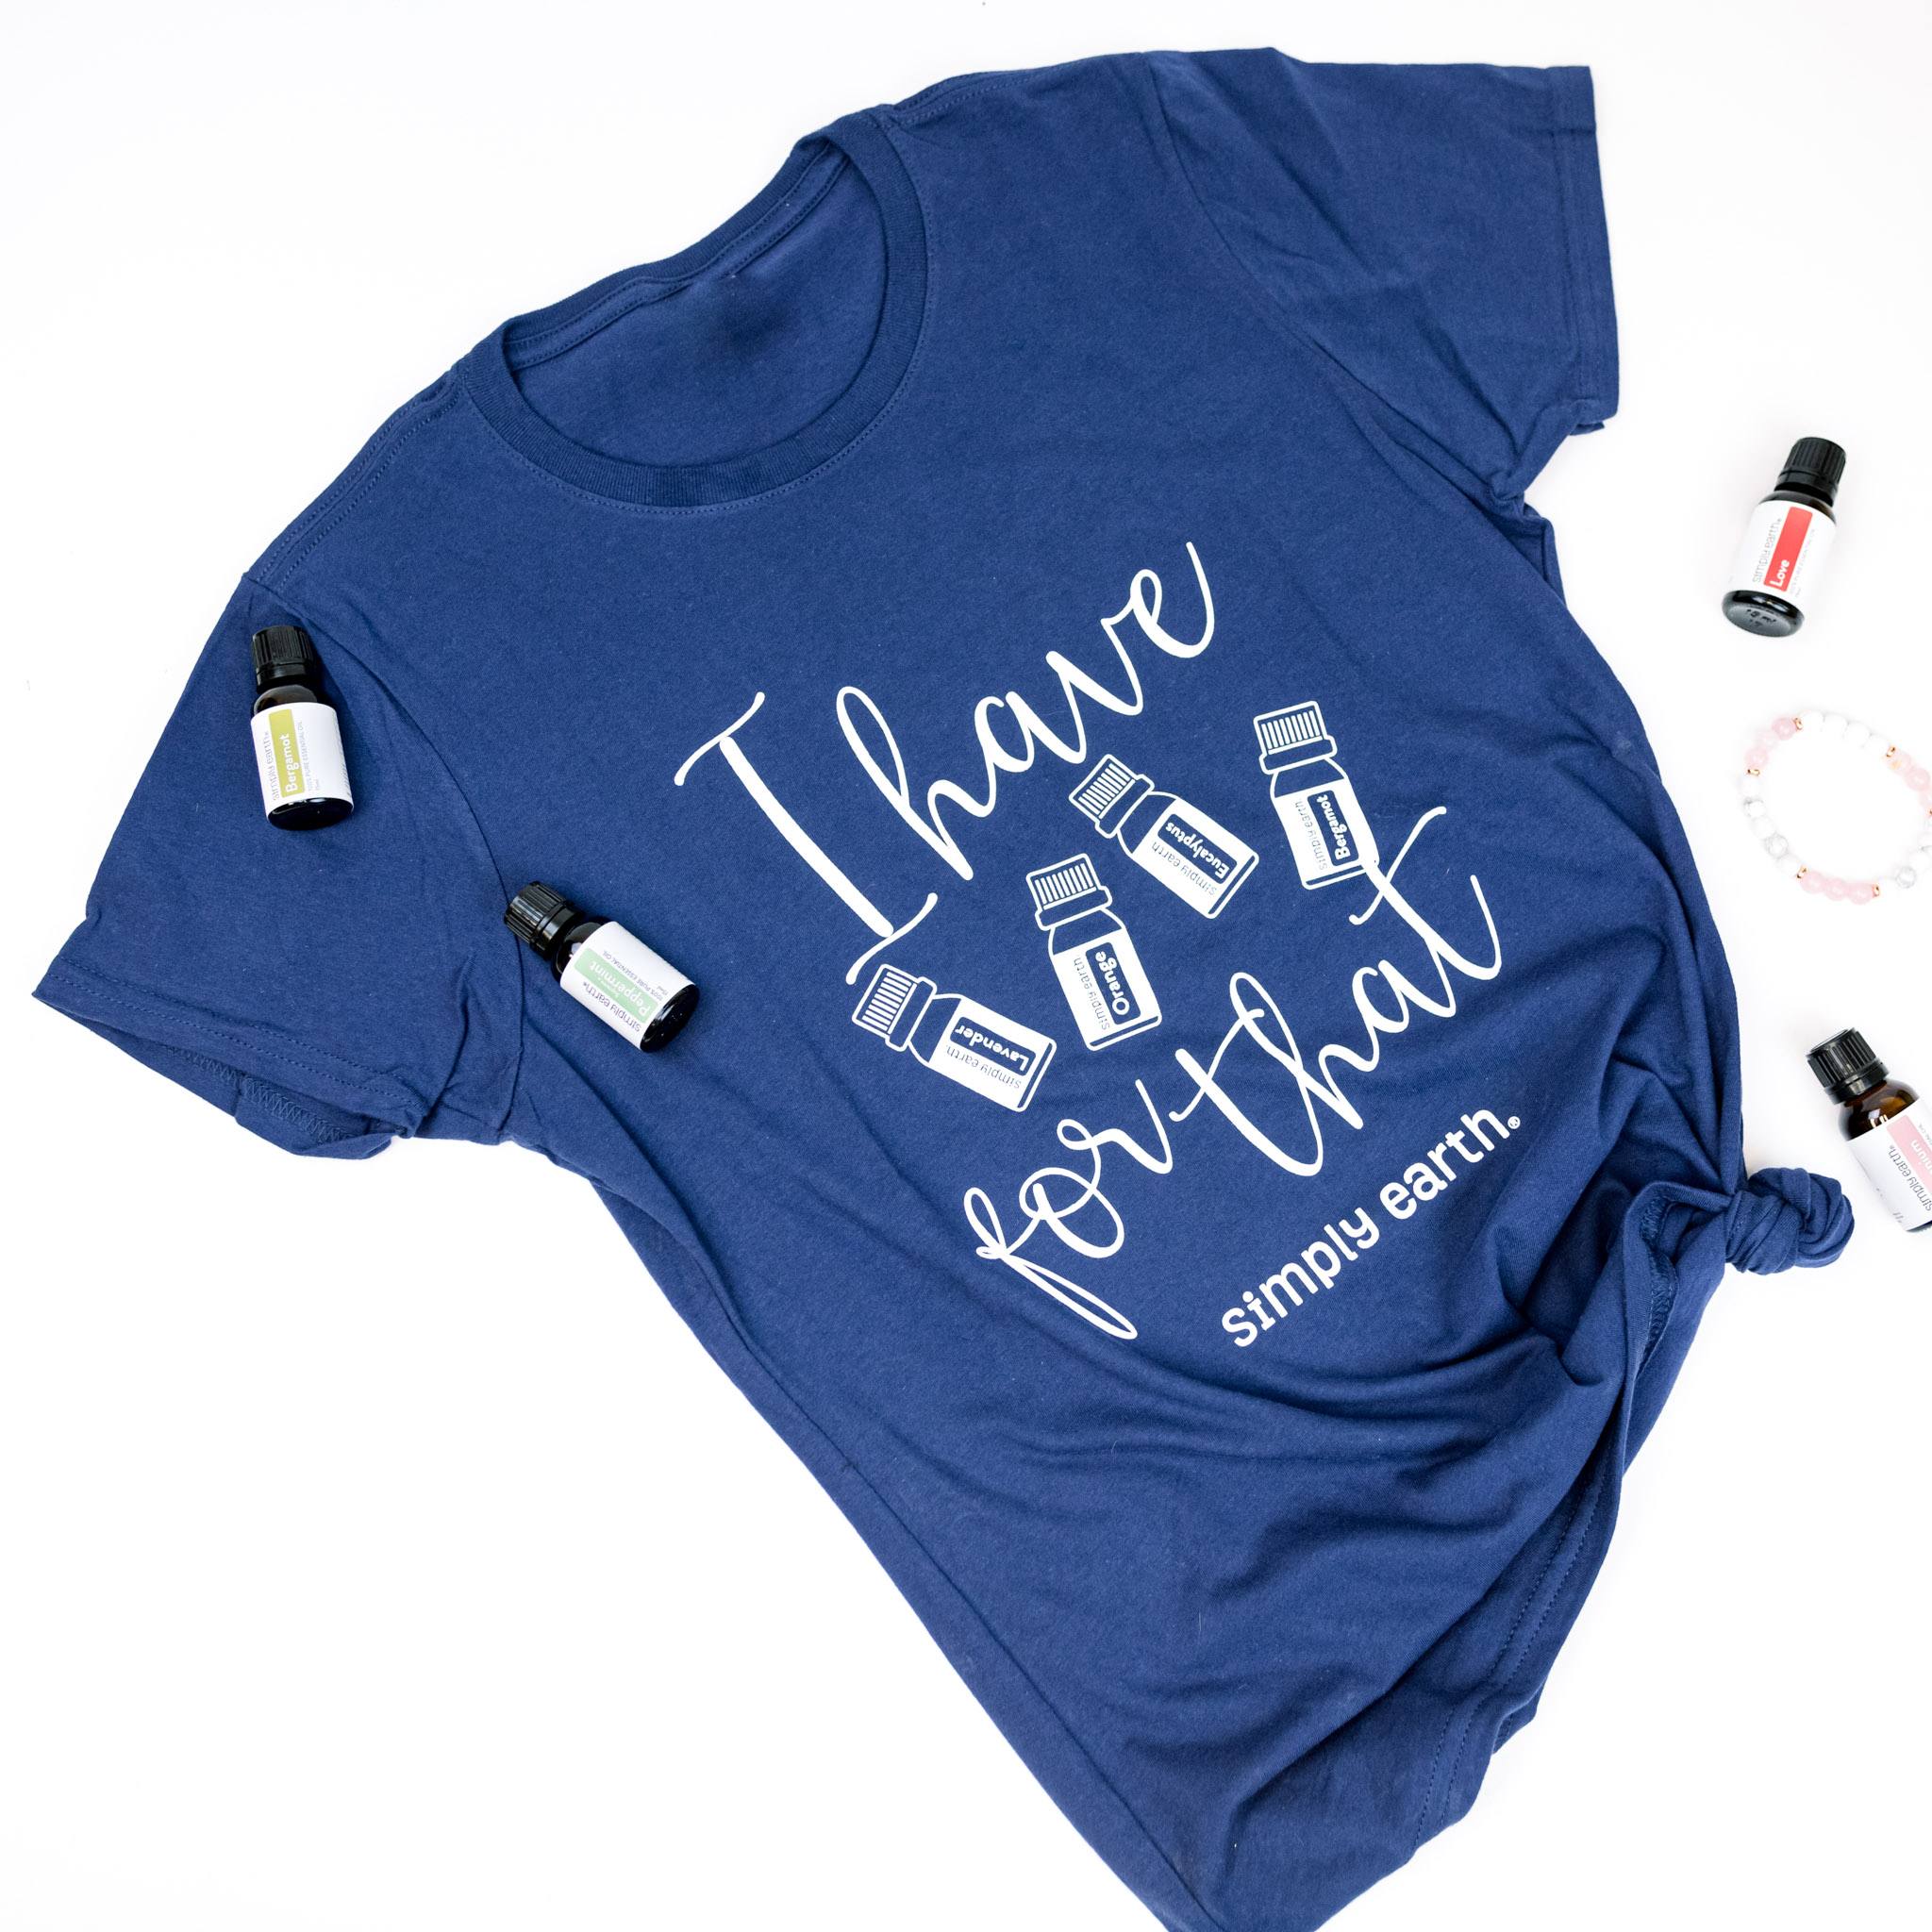 "I Have Oils for That" T-shirt Size: XS